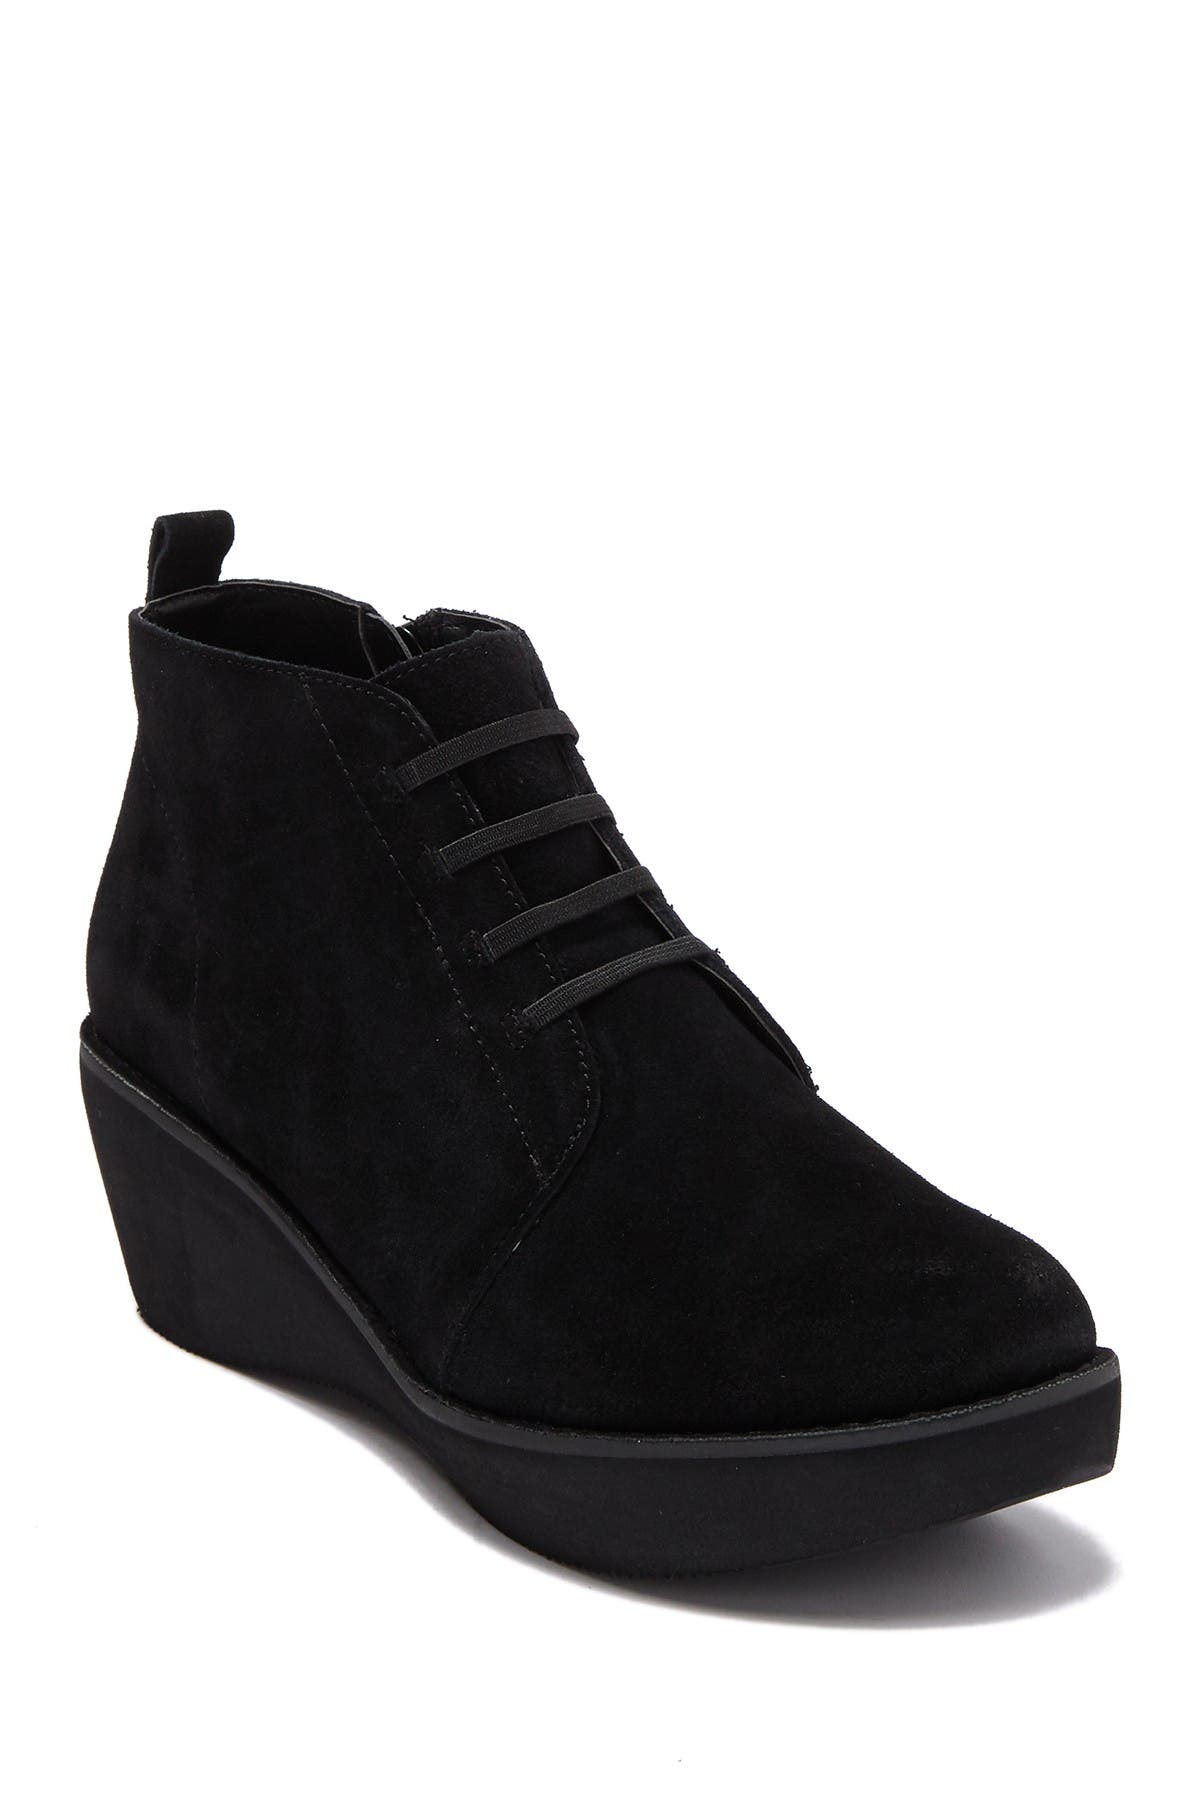 kenneth cole prime bootie